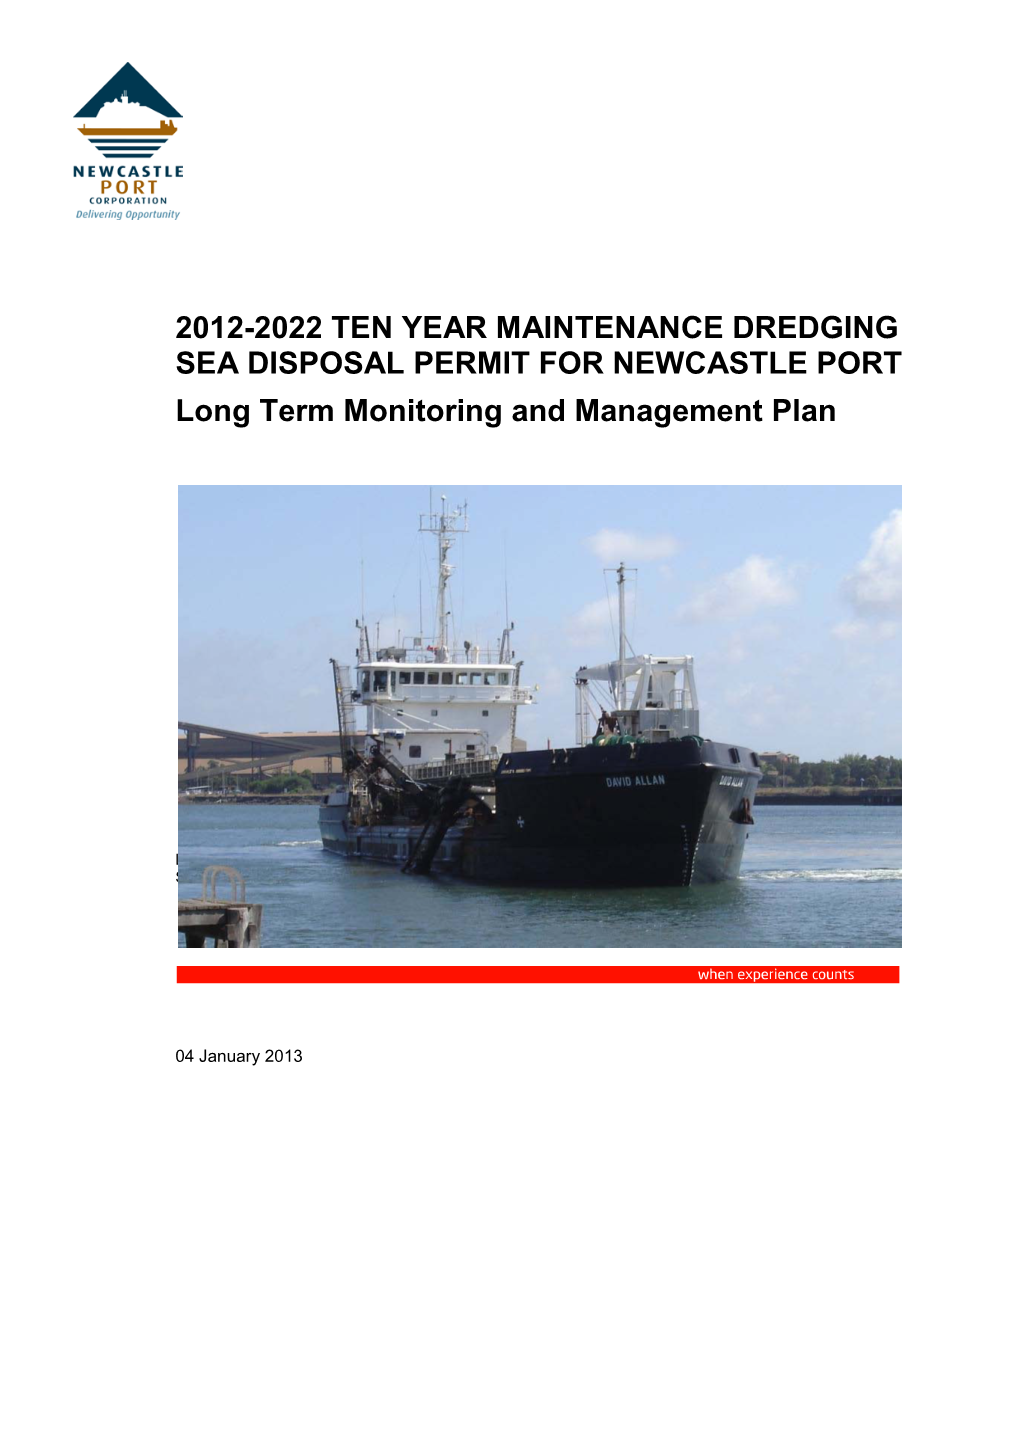 2012-2022 TEN YEAR MAINTENANCE DREDGING SEA DISPOSAL PERMIT for NEWCASTLE PORT Long Term Monitoring and Management Plan